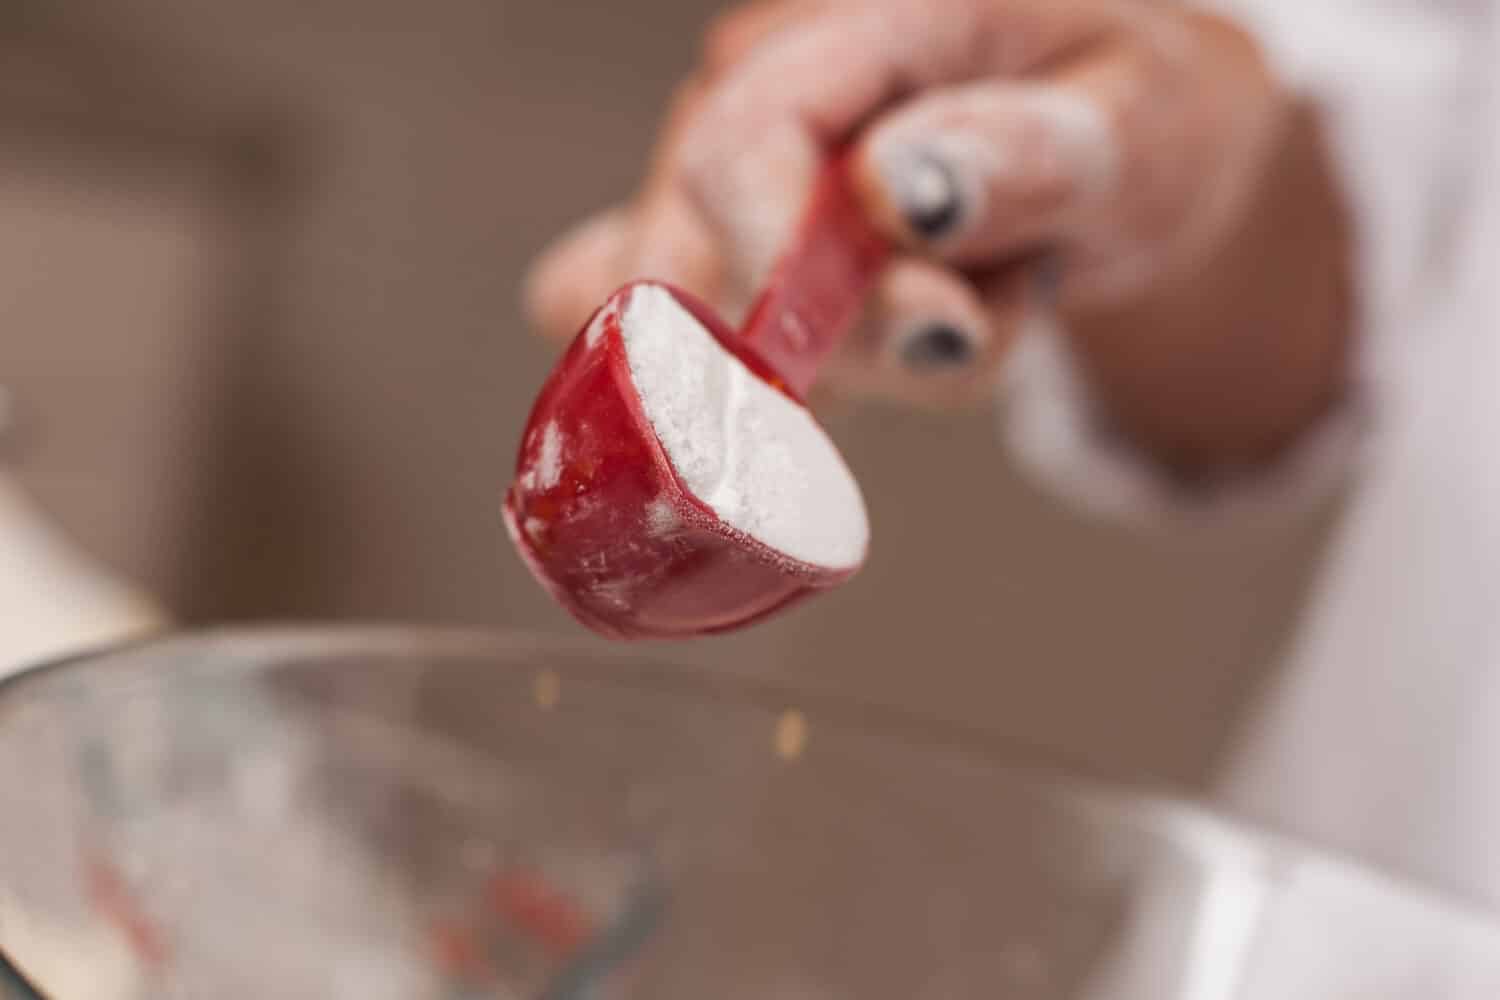 Gourmet chef pouring baking powder into bowl